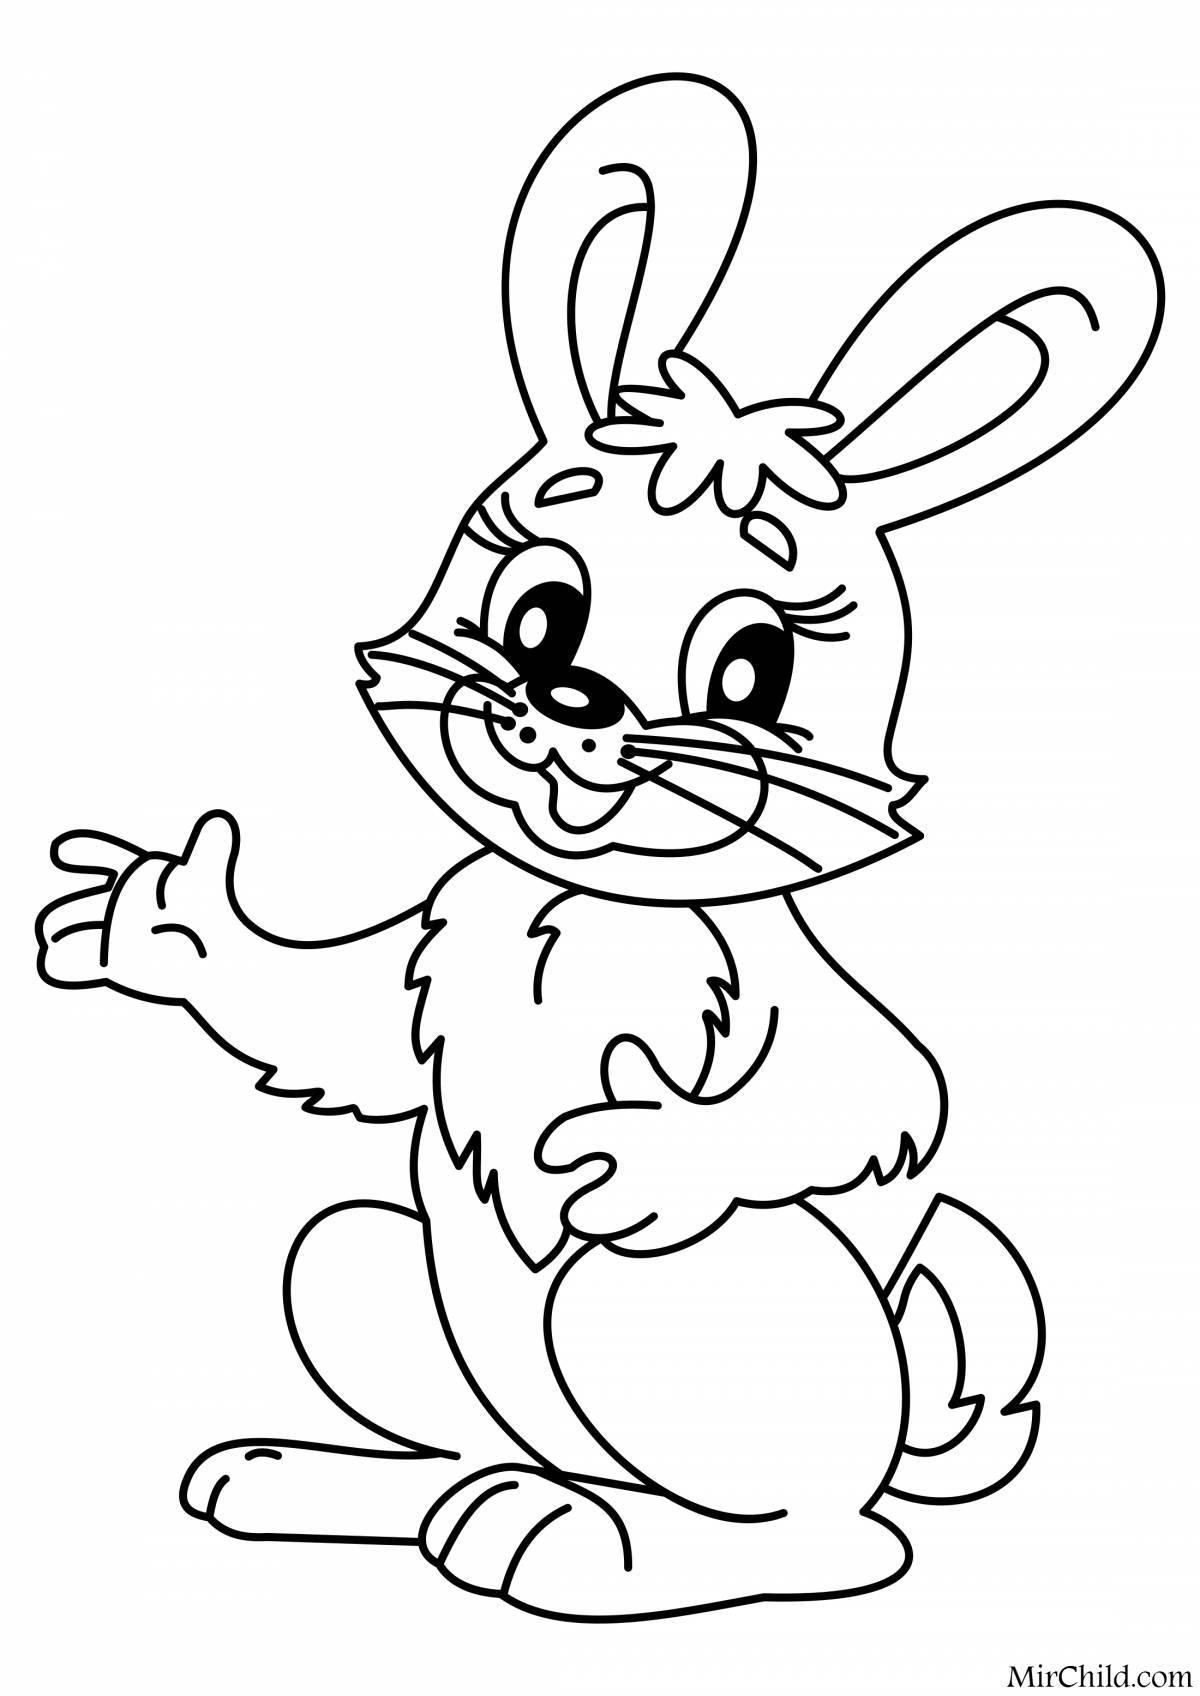 Shiny Bunny coloring book for 3-4 year olds